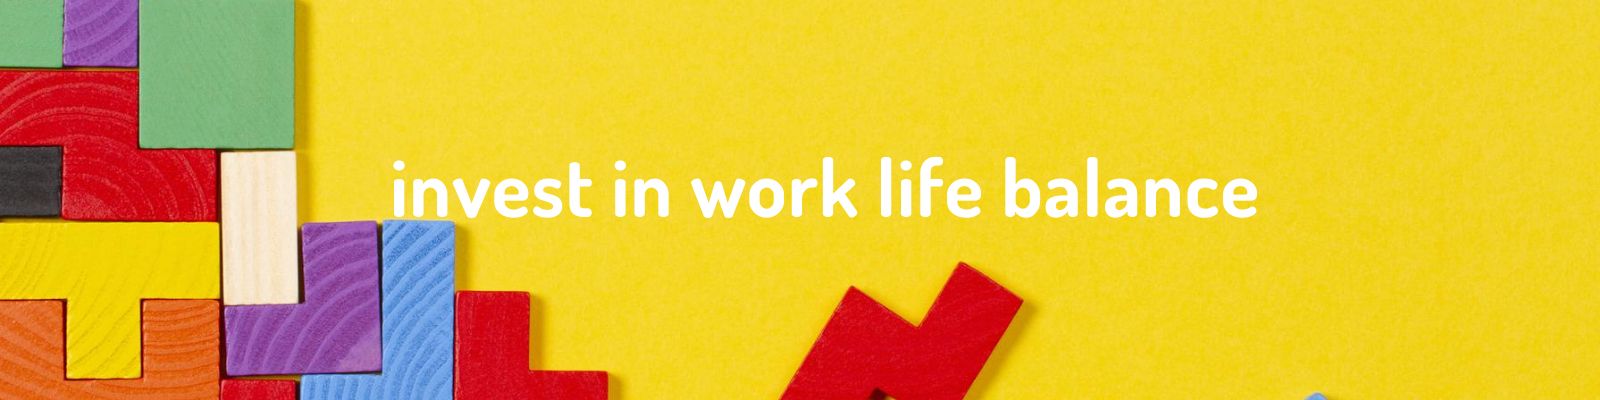 words invest in work life balance 